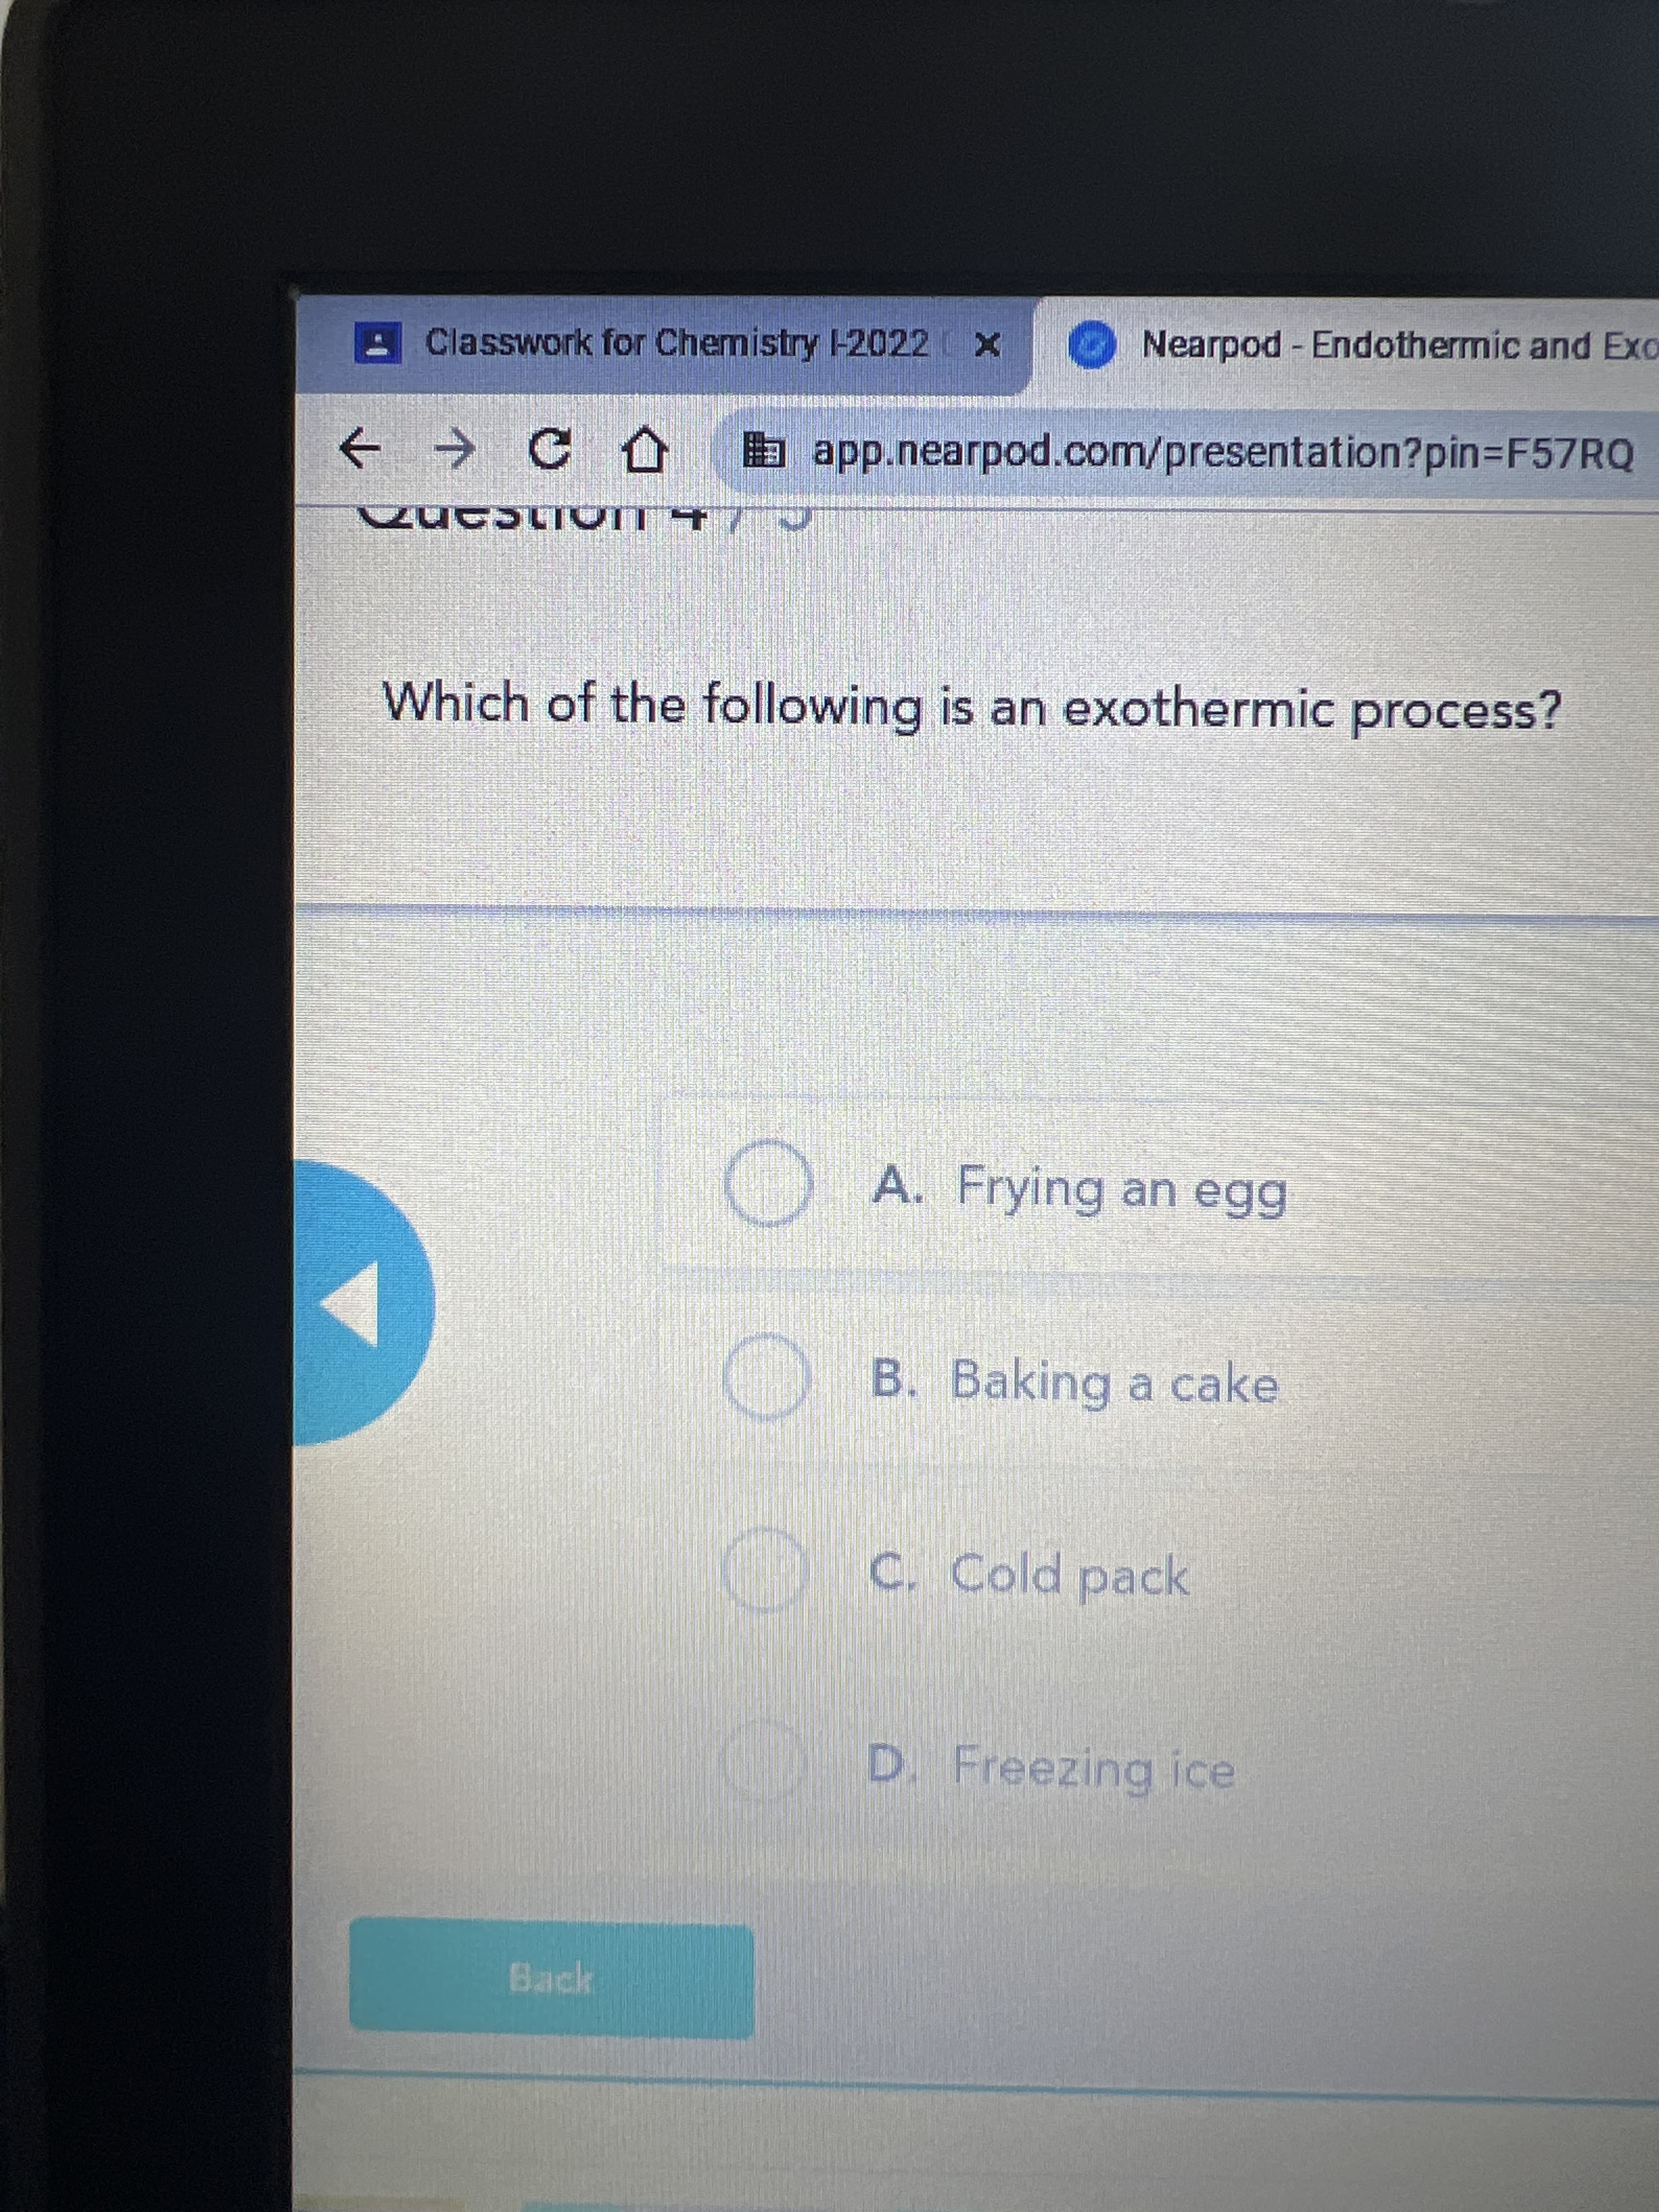 Classwork for Chemistry -2022 X
Nearpod Endothermic and Exo
a app.nearpod.com/presentation?pin3F57RQ
Which of the following is an exothermic process?
) A. Frying an egg
B. Baking a cake
C. Cold pack
D. Freezing ice
Back
